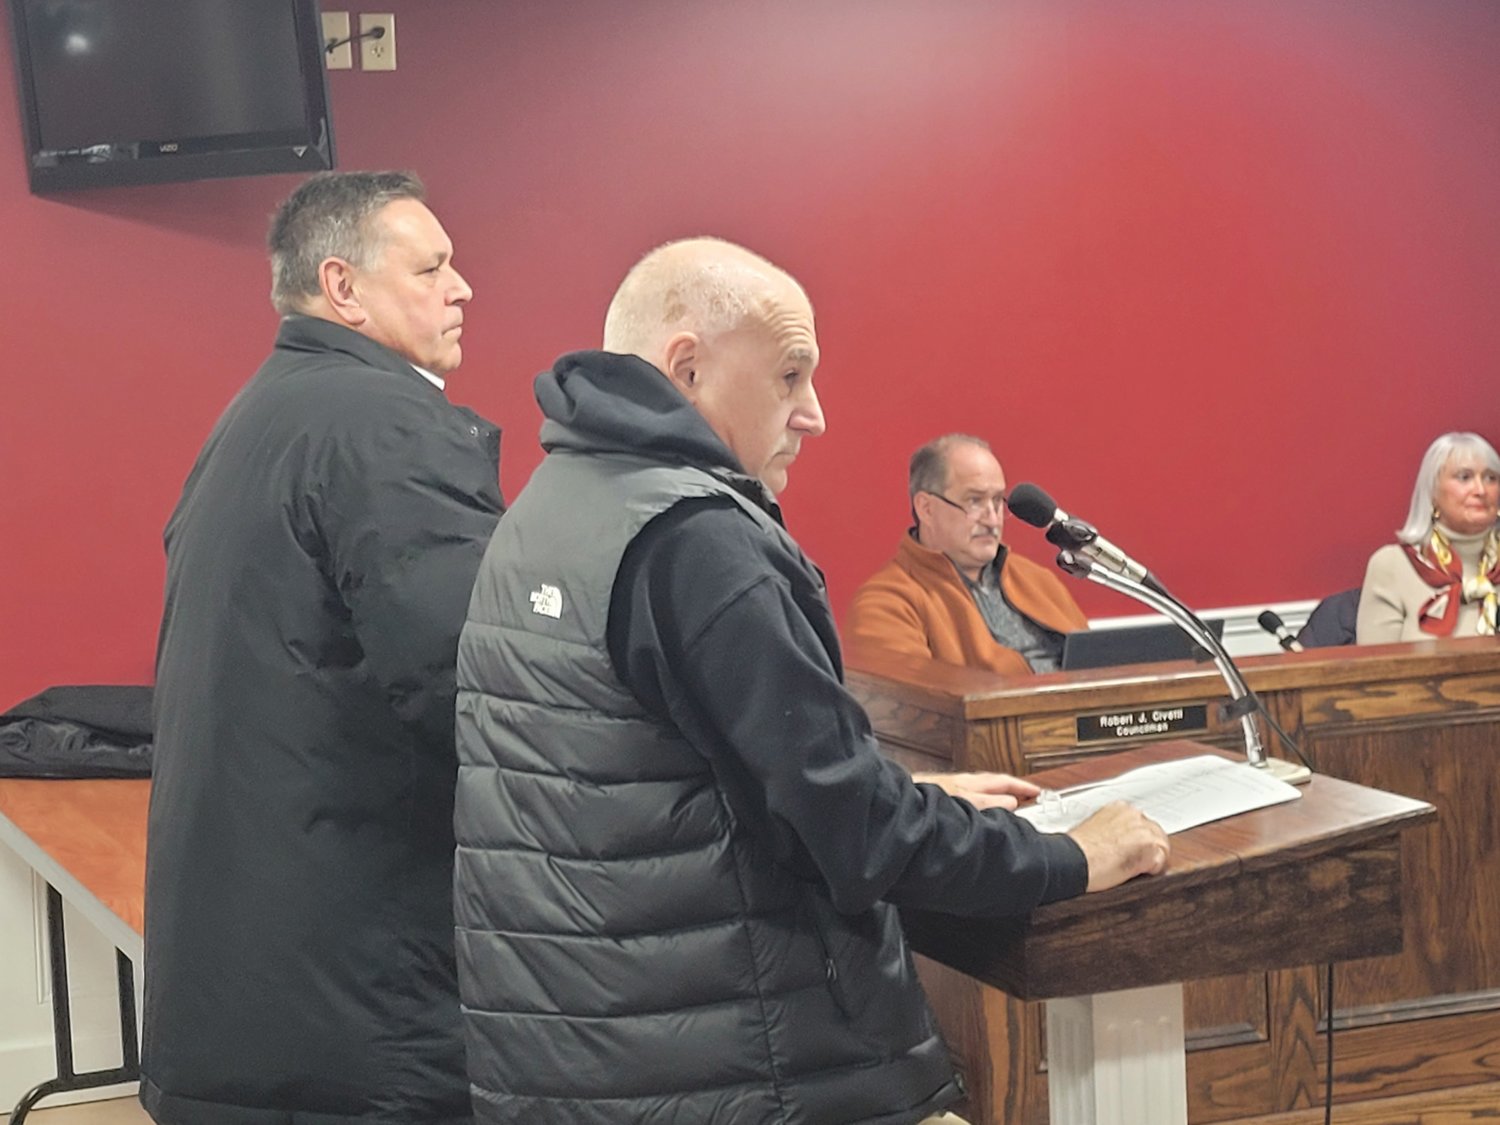 APPOINTED BY THE MAYOR: Johnston Mayor Joseph M. Polisena called Richard J. DelFino Jr. before Town Council on Monday night. DelFino has been appointed the new Johnston Senior Center Executive Director following last week’s firing of Matt Bolton.